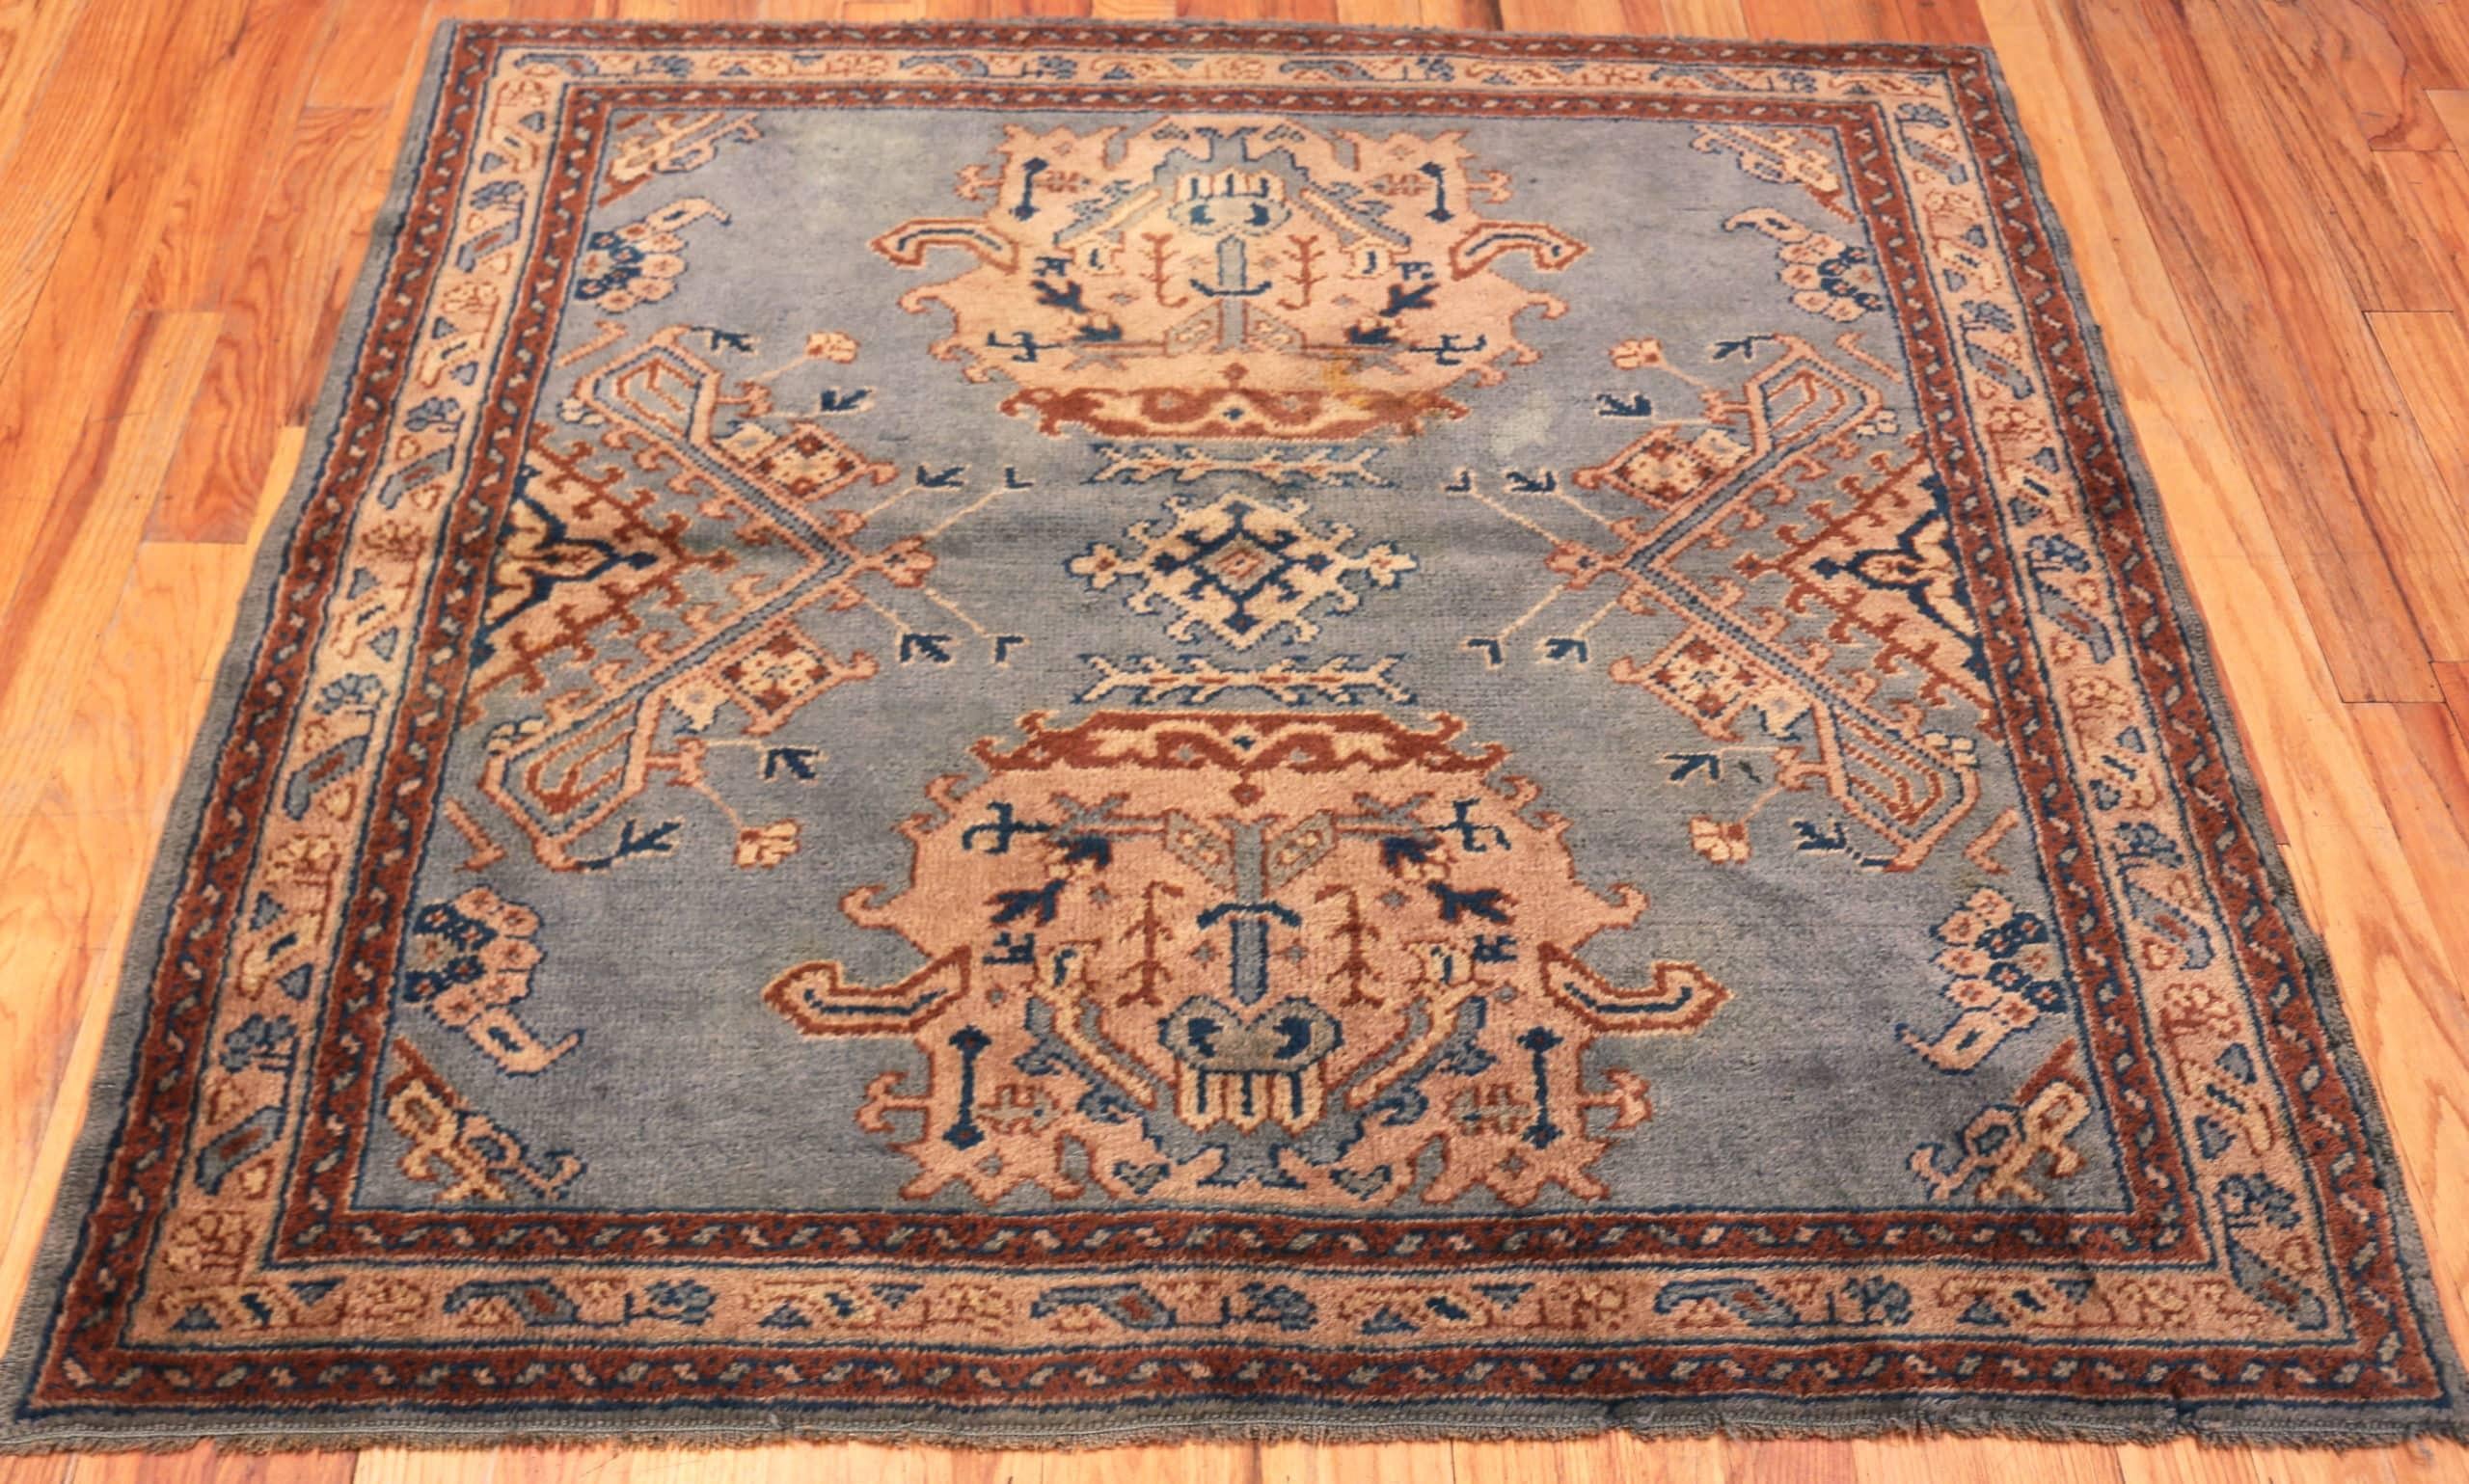 20th Century Blue Background Antique Turkish Oushak Square Rug. 4 ft 9 in x 5 ft